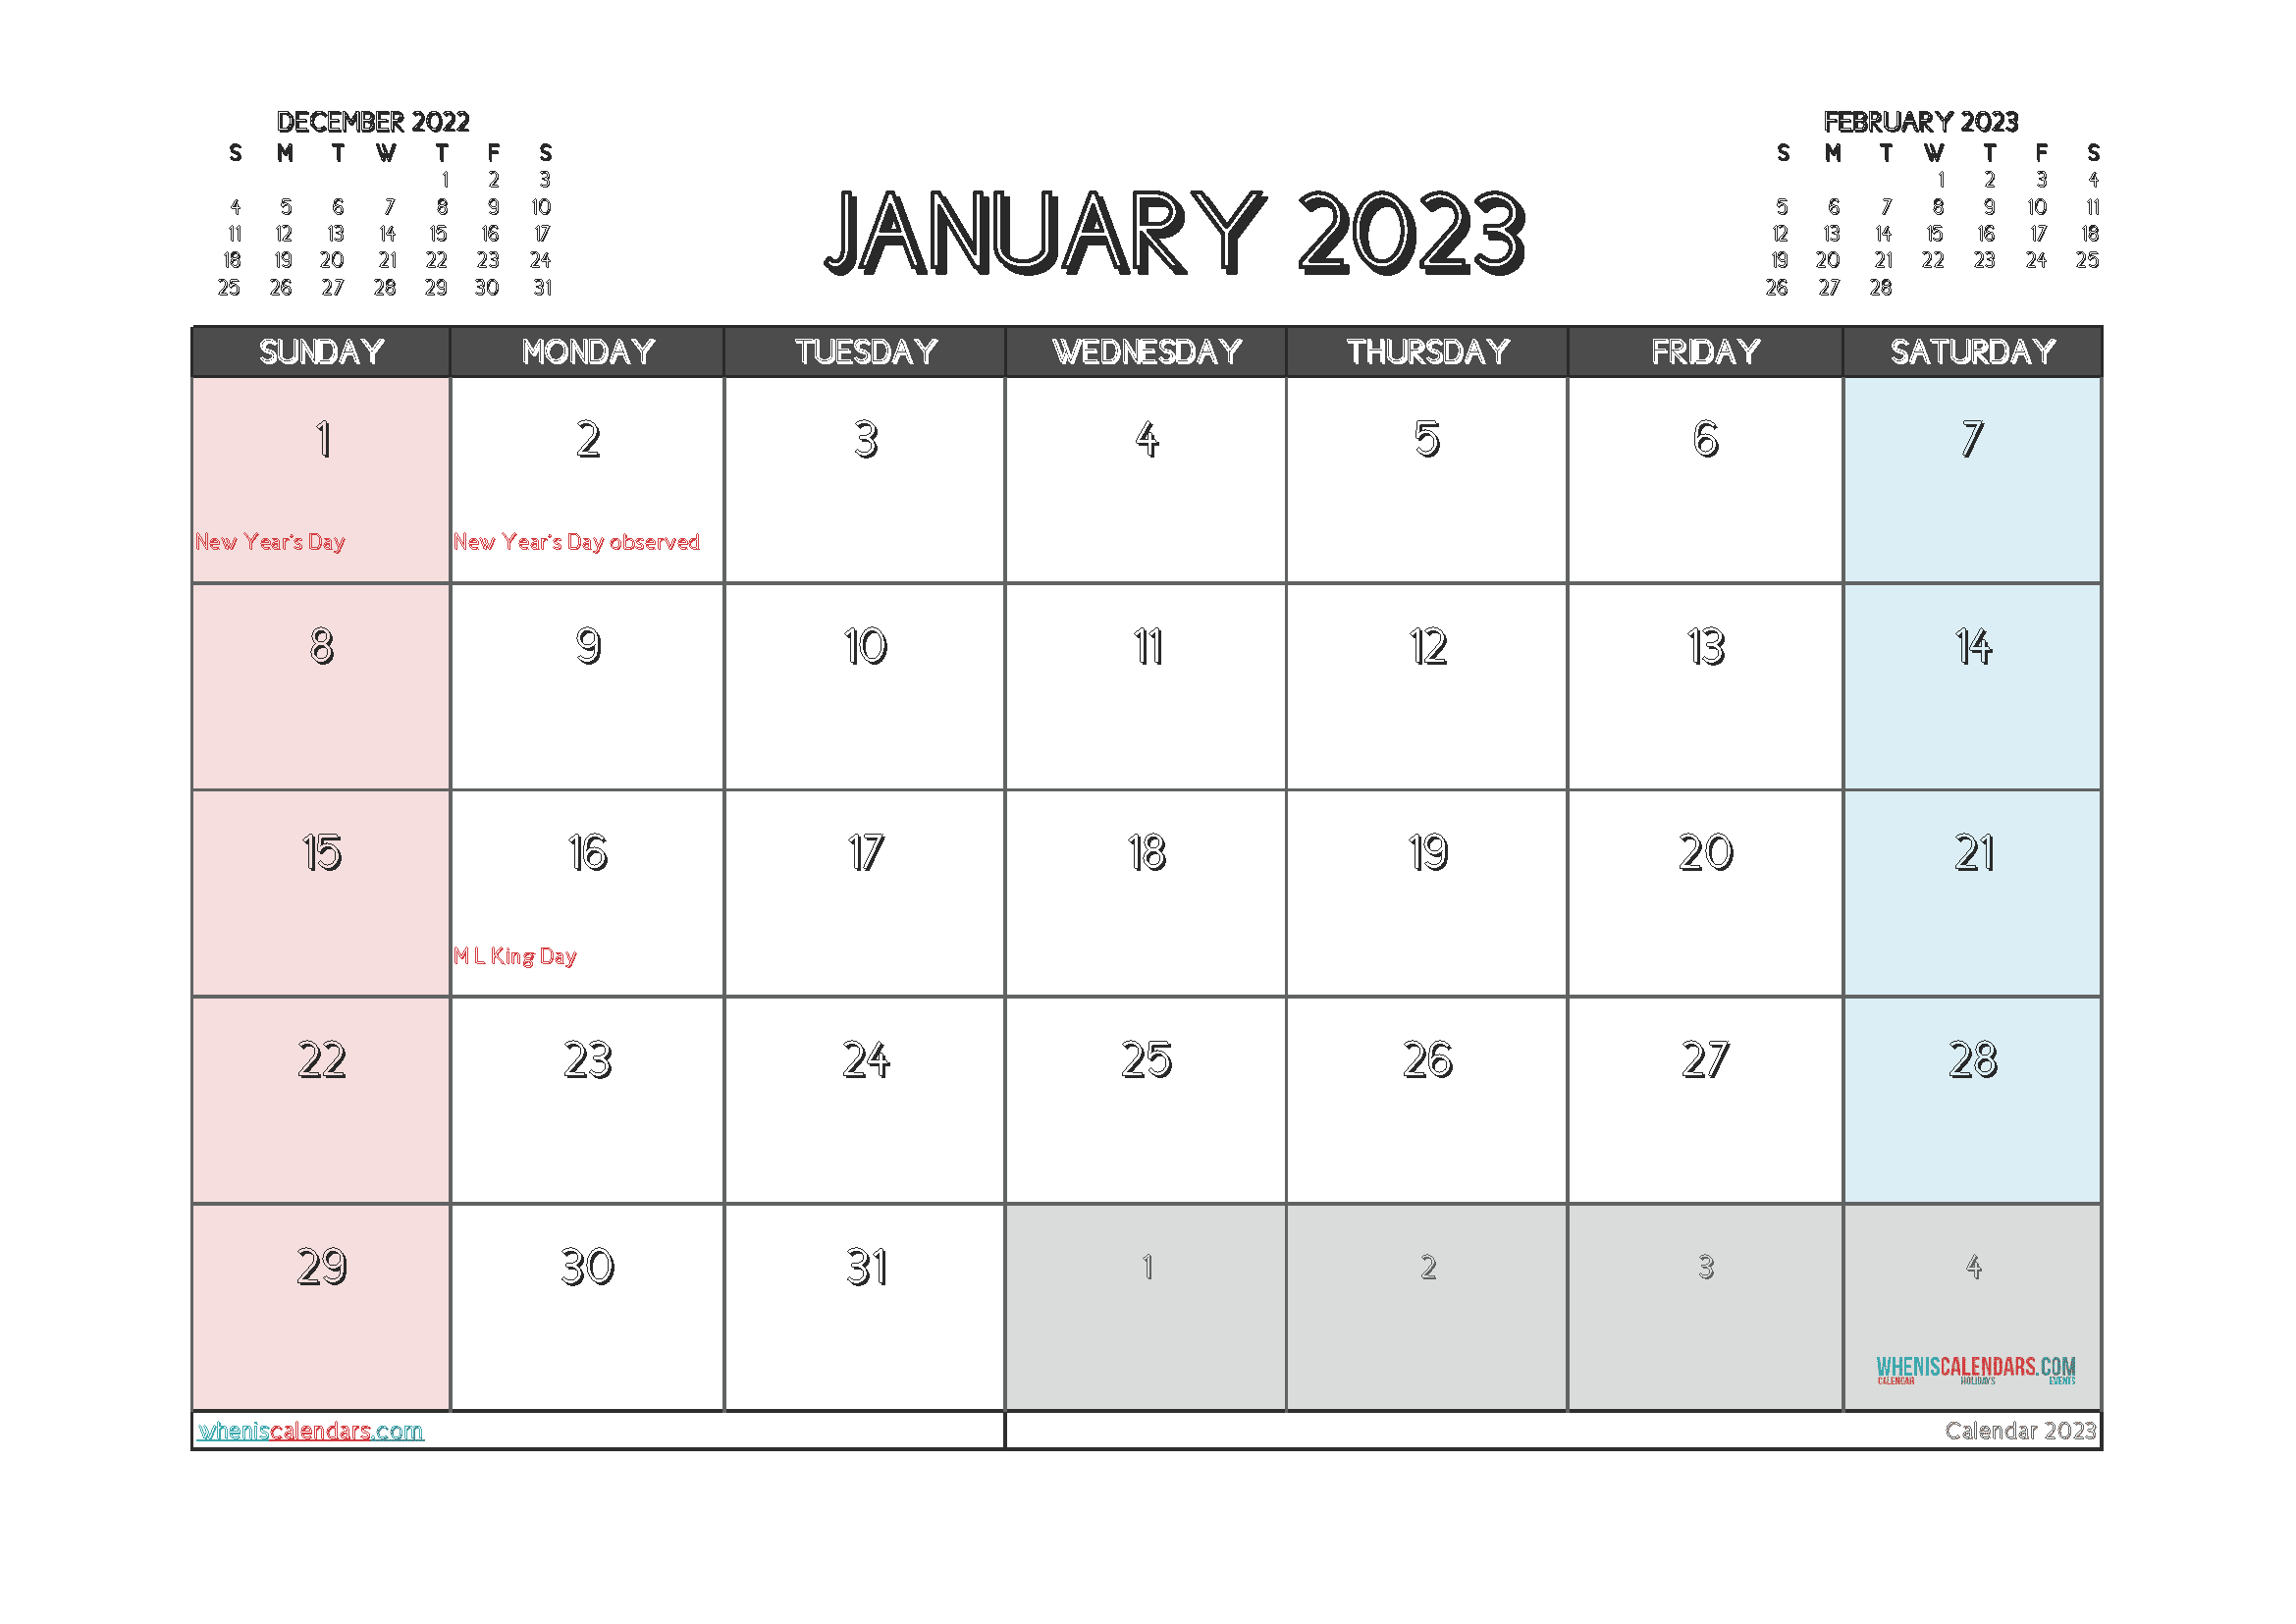 Free Printable Calendar 2023 January with Holidays PDF in Landscape